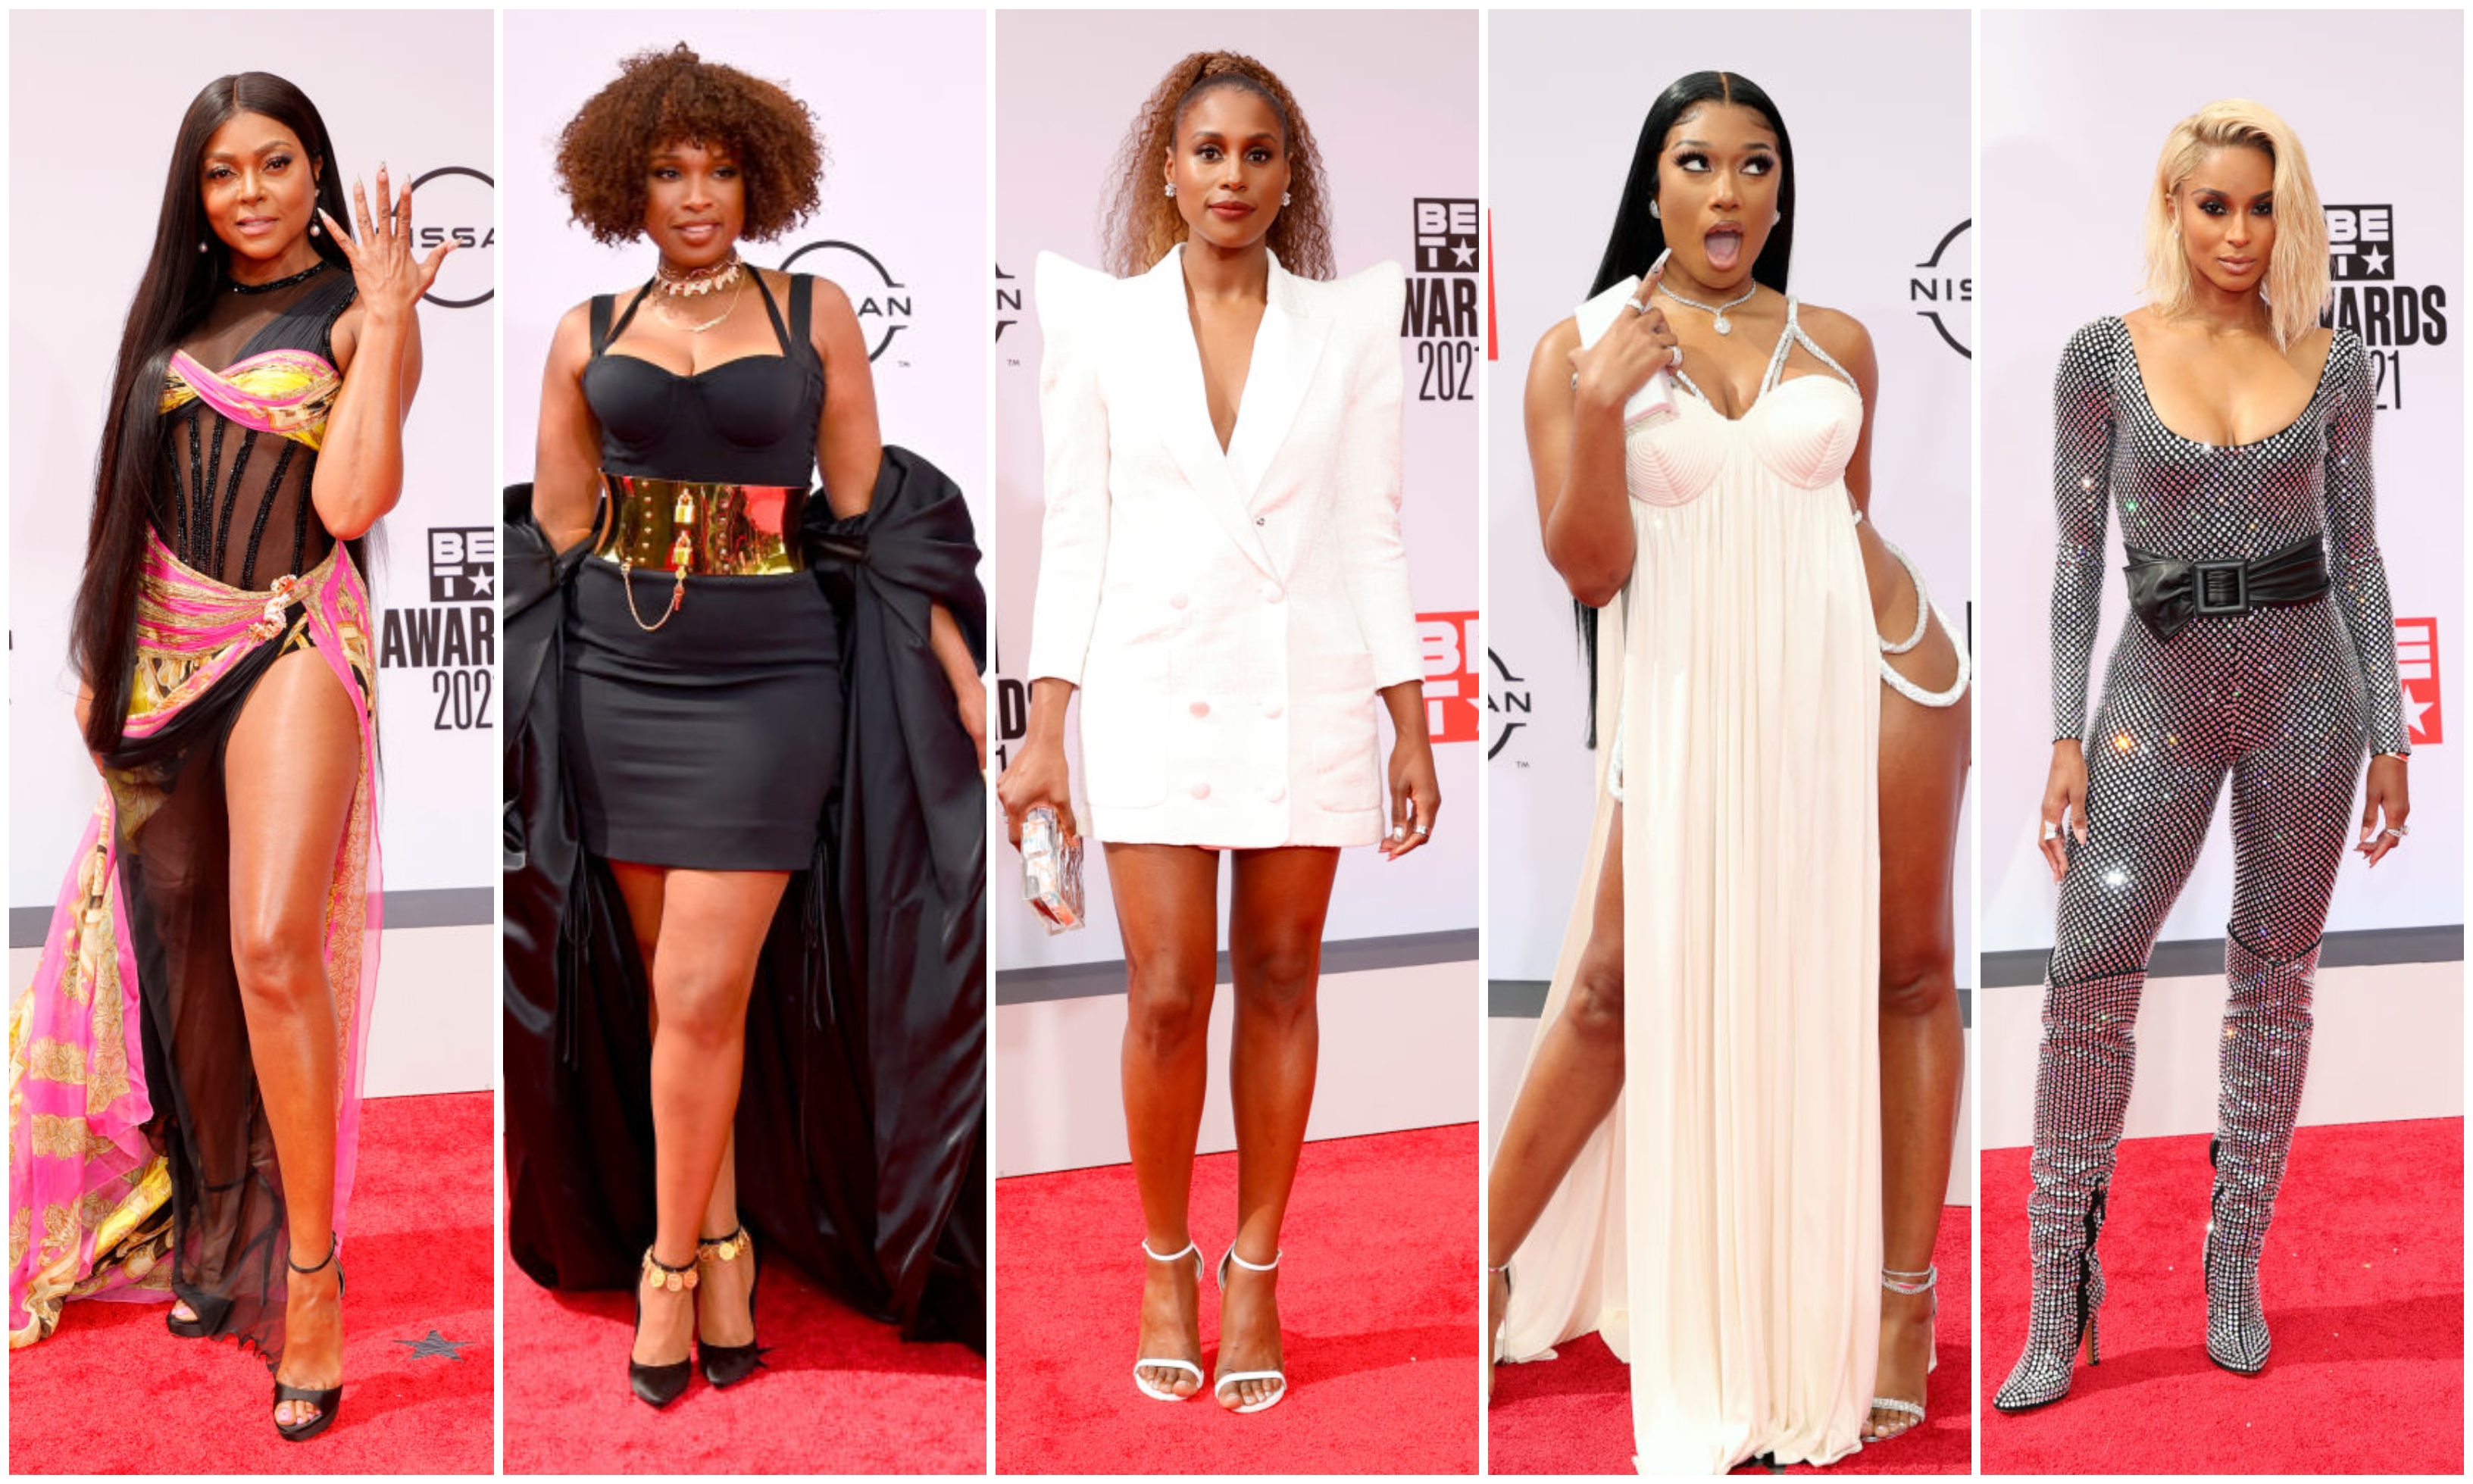 Lil Kim - One - Image 6 from BET Awards: Red Carpet Styles Over the Years